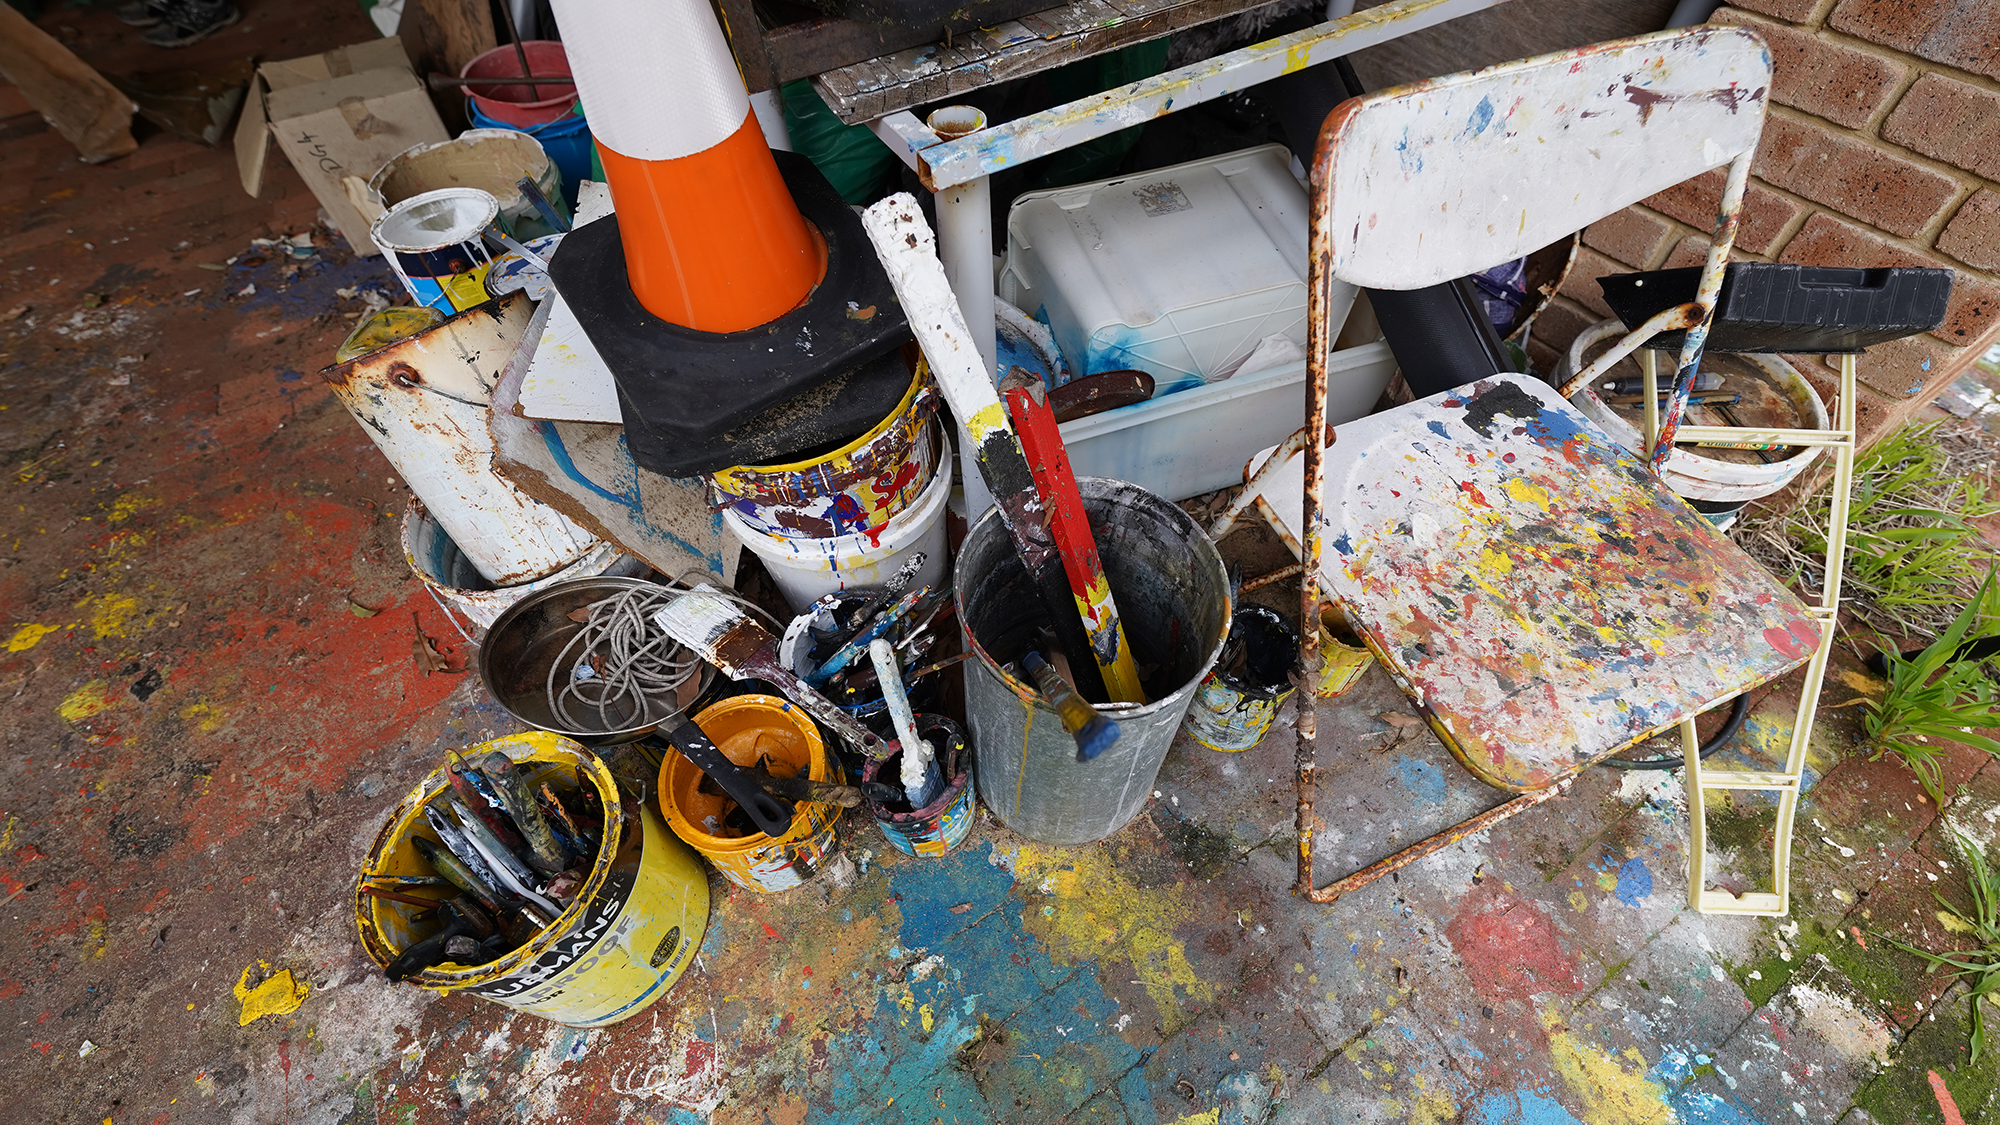 Photograph of a folding chair splattered with paint alongside buckets of paint and paintbrushes